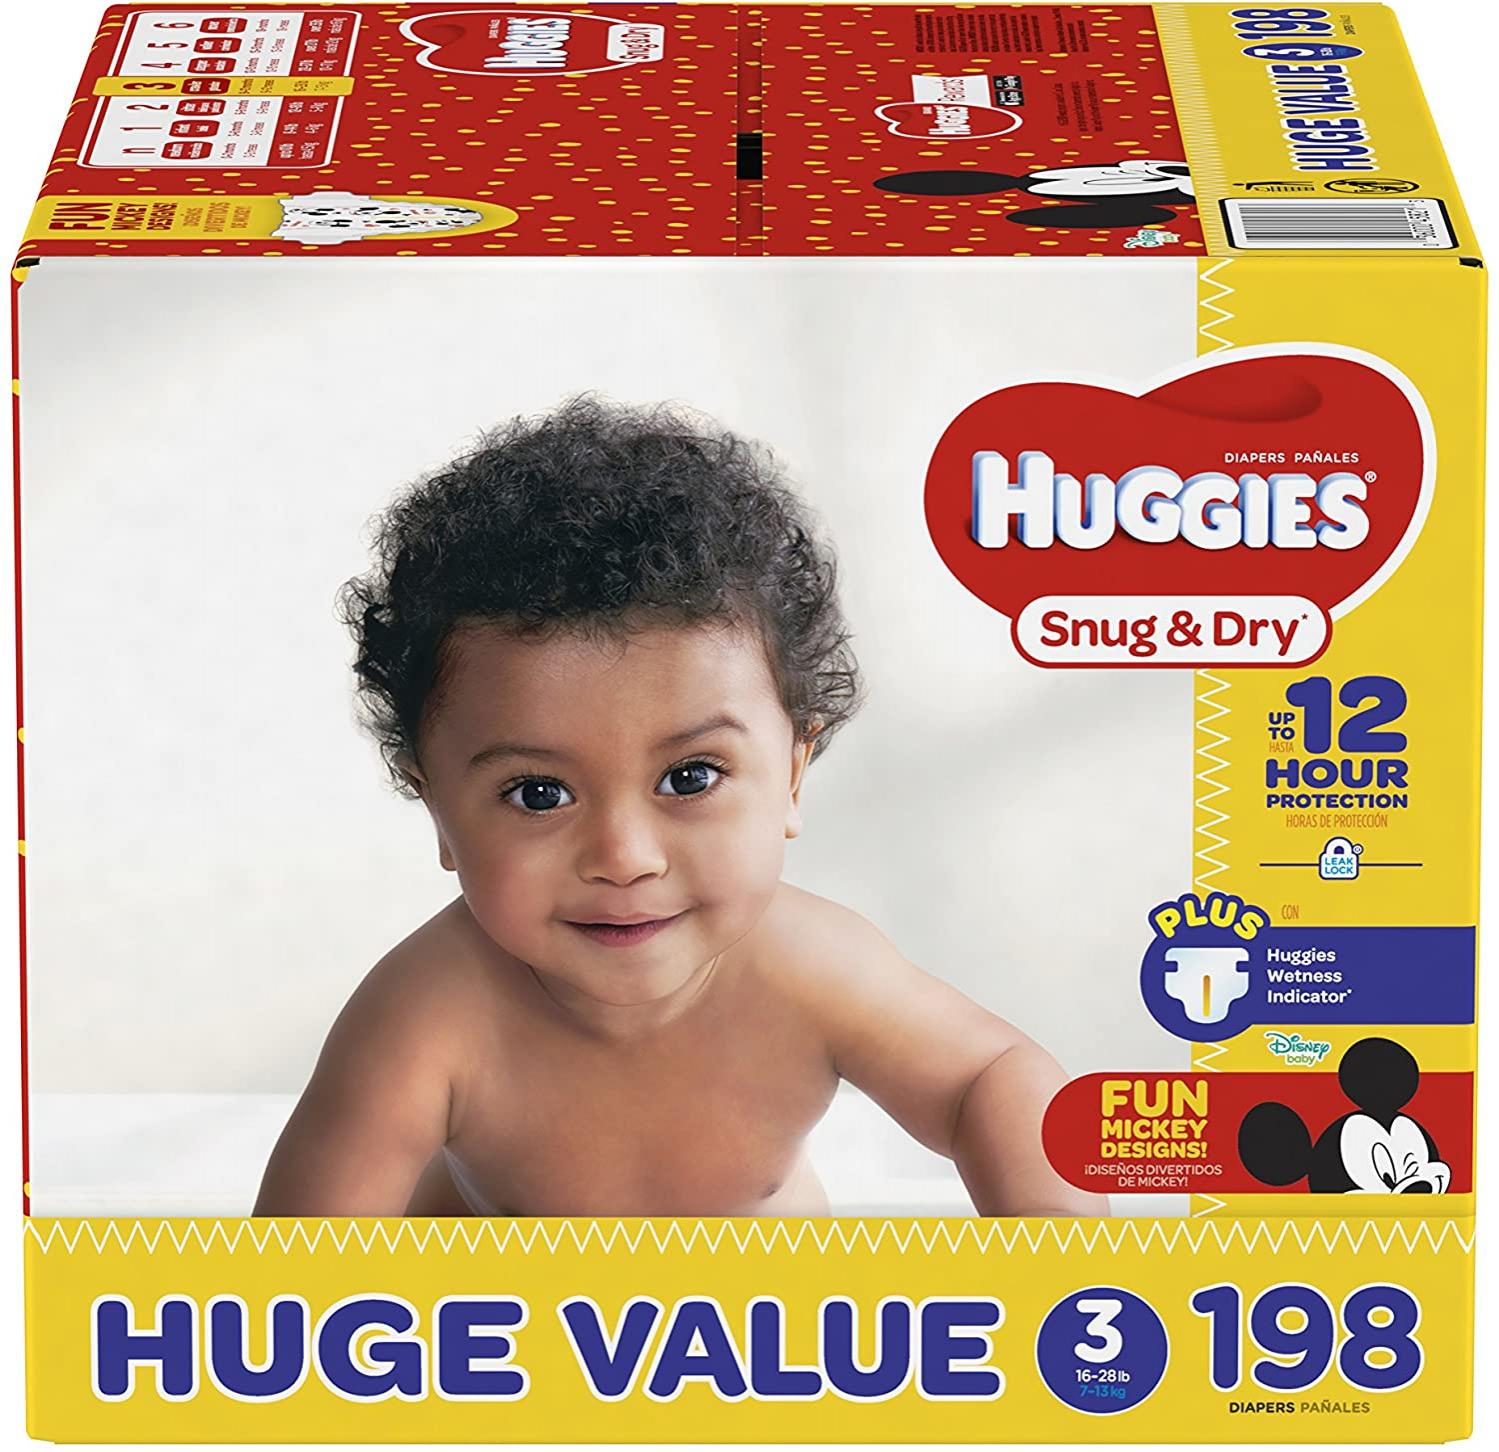 Huggies Snug & Dry Diapers, Size 3, 198 Count